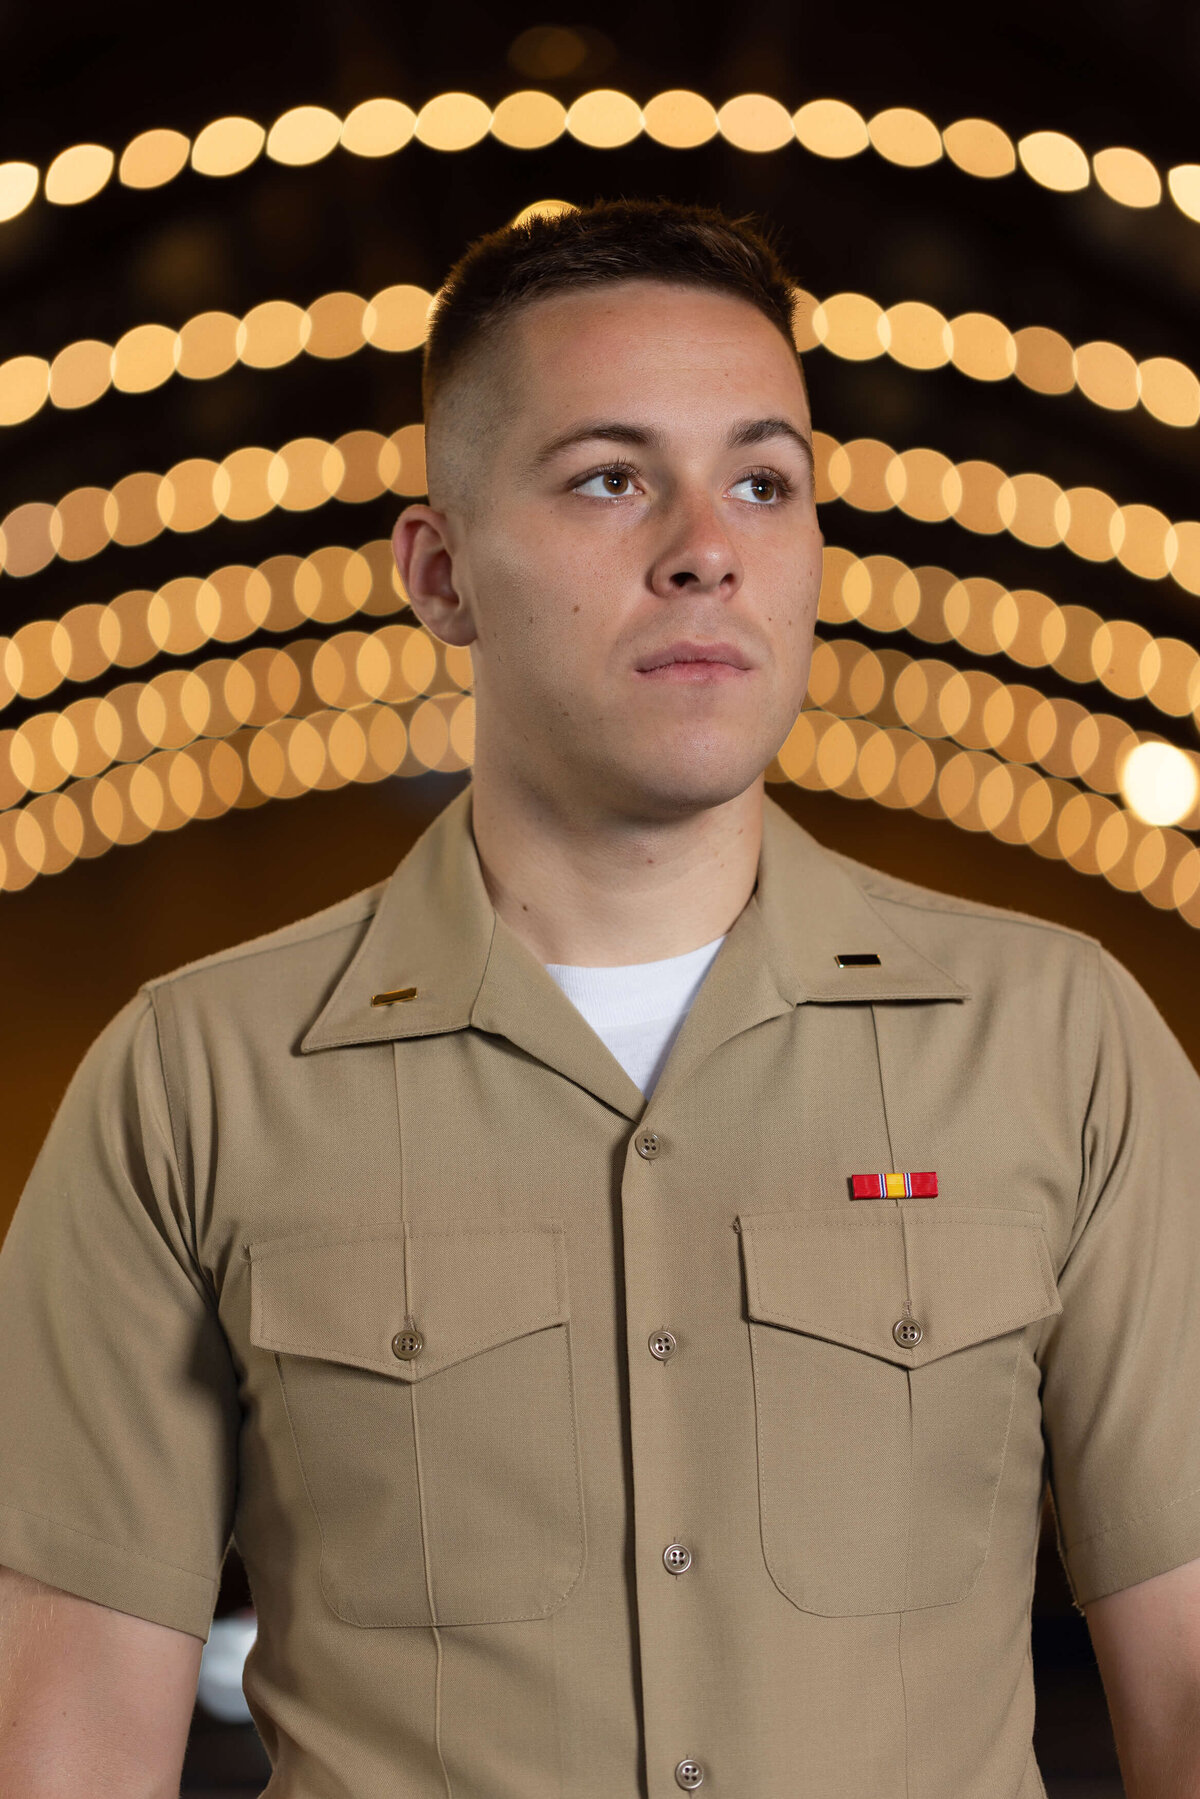 U.S. Marine Corps officer smiles with bokeh lights background.